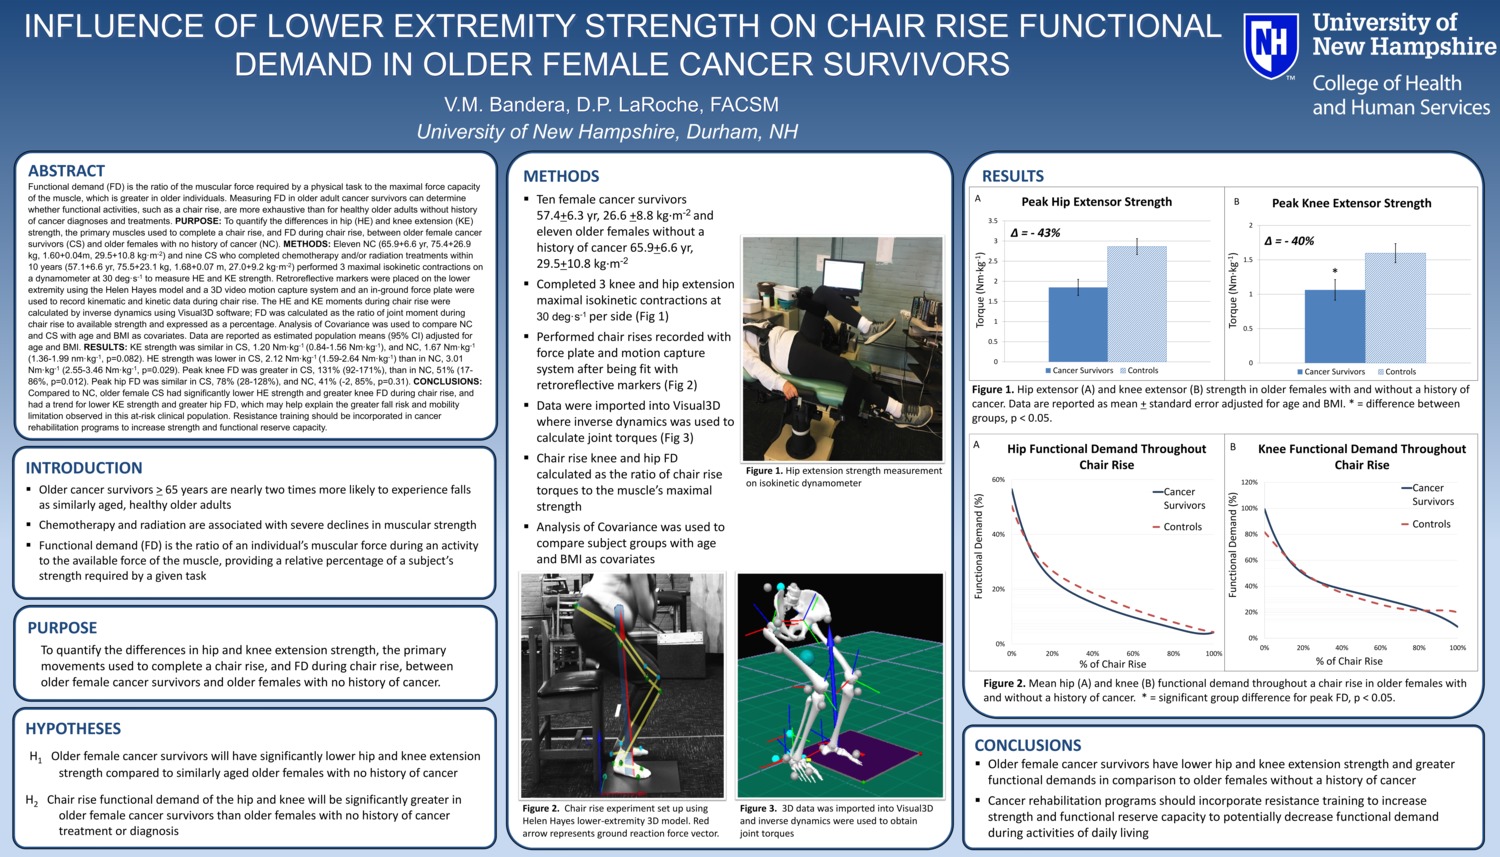 Influence Of Lower Extremity Strength On Chair Rise Functional Demand In Older Female Cancer Survivors  by vmb1005